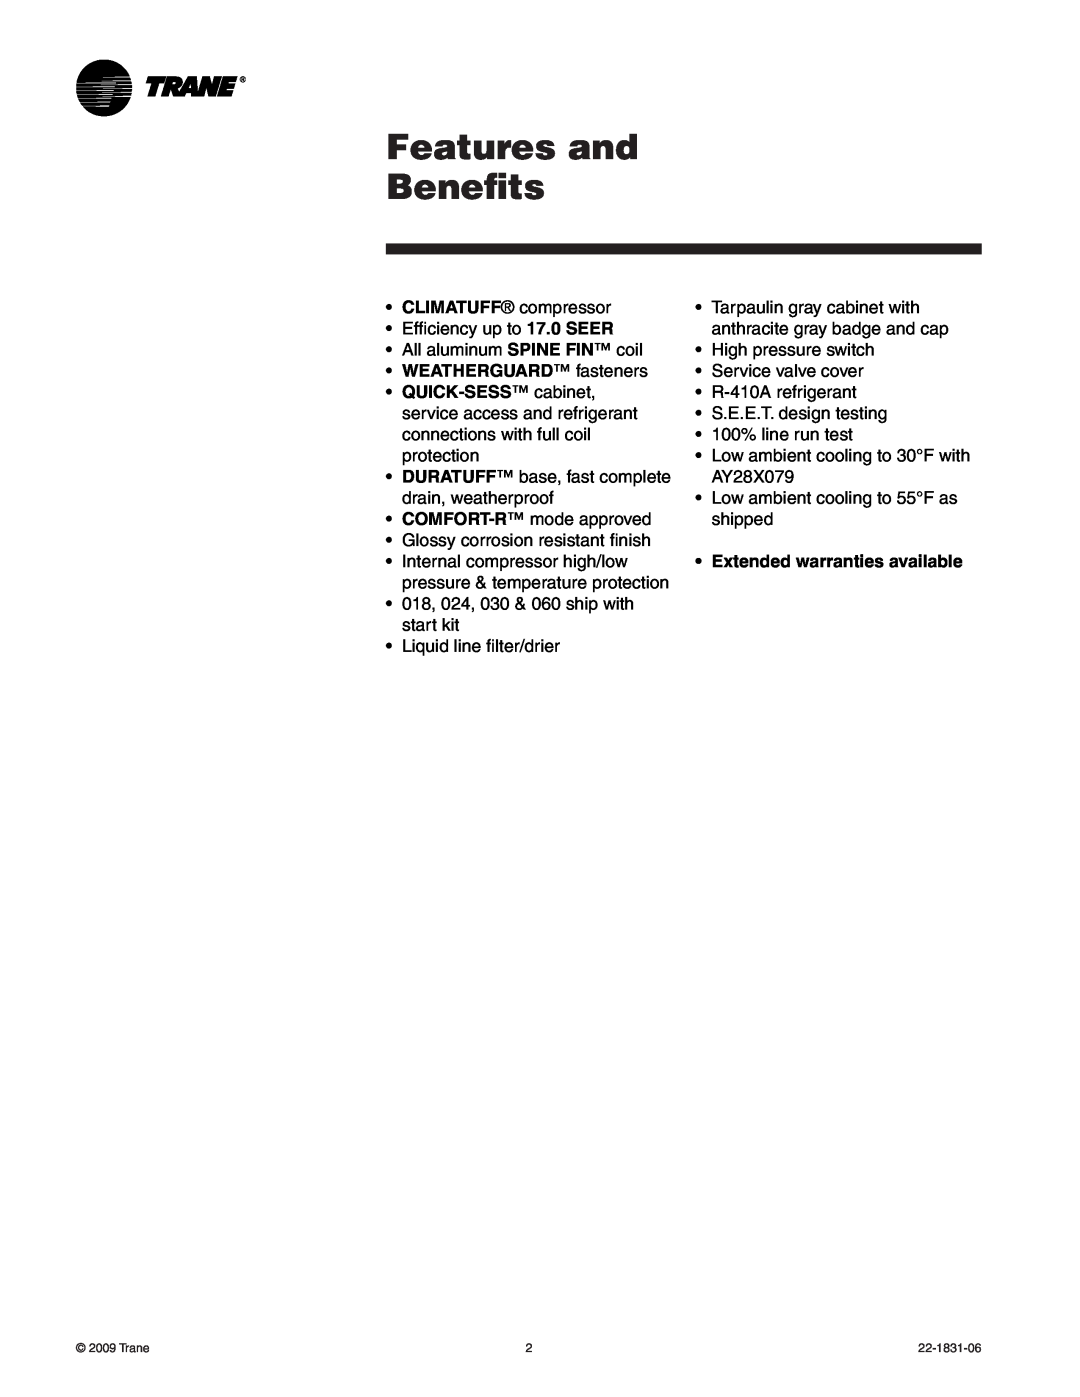 Trane XR15 manual Features and Benefits, WeatherGuard fasteners, Extended warranties available 